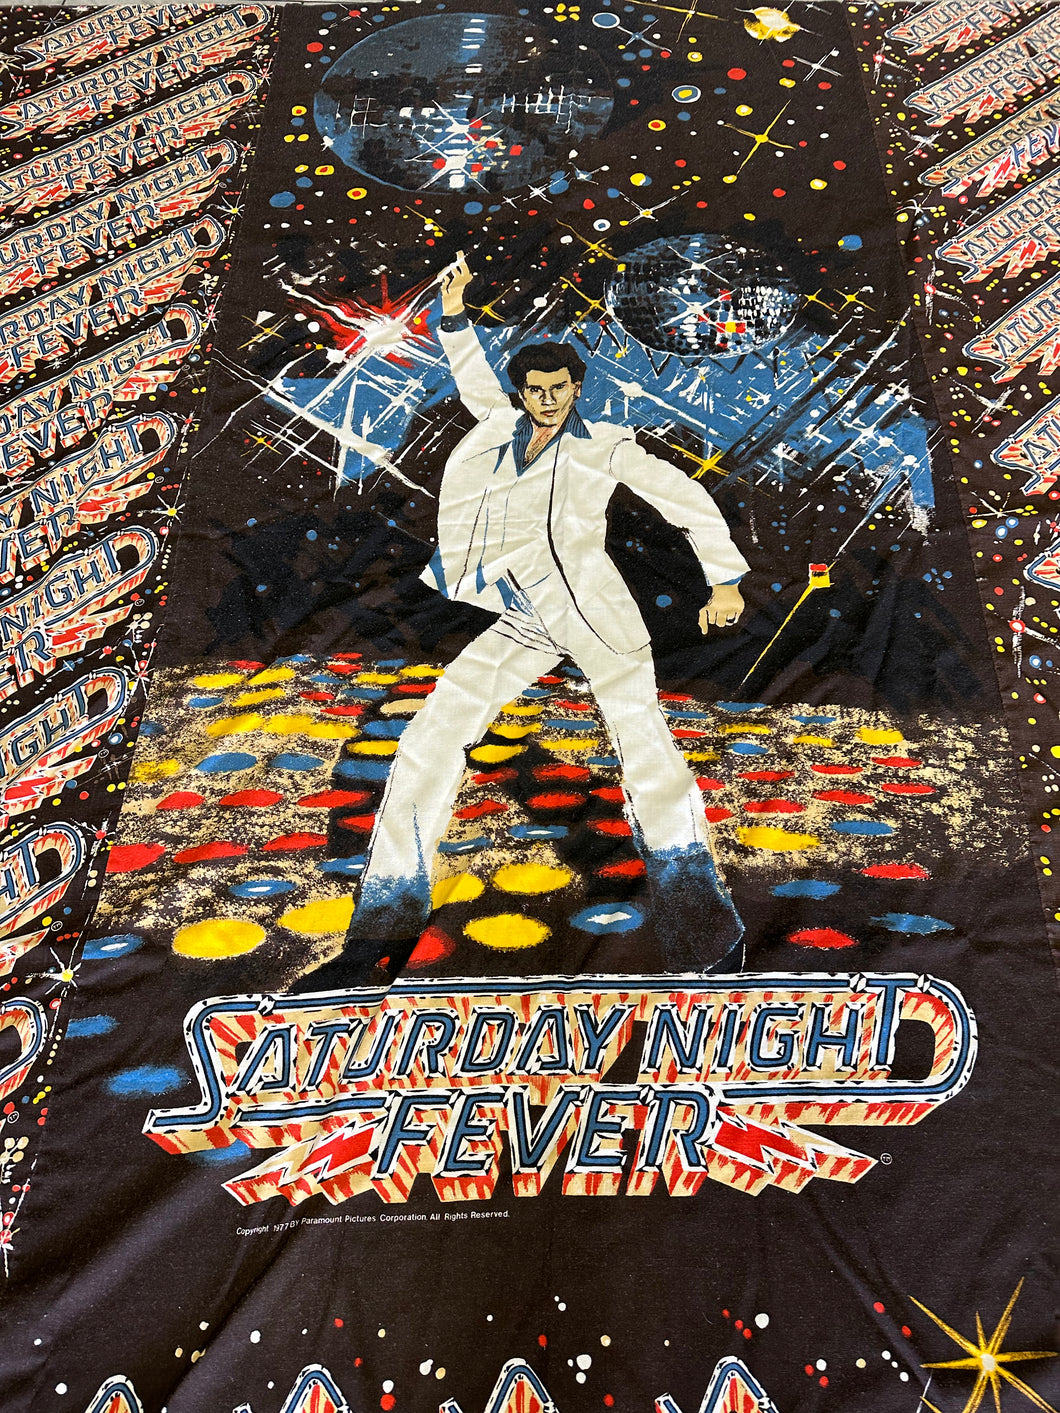 VINTAGE SATURDAY NIGHT FEVER JOHN TRAVOLTA BED COVER FABRIC BEDDING PREOWNED